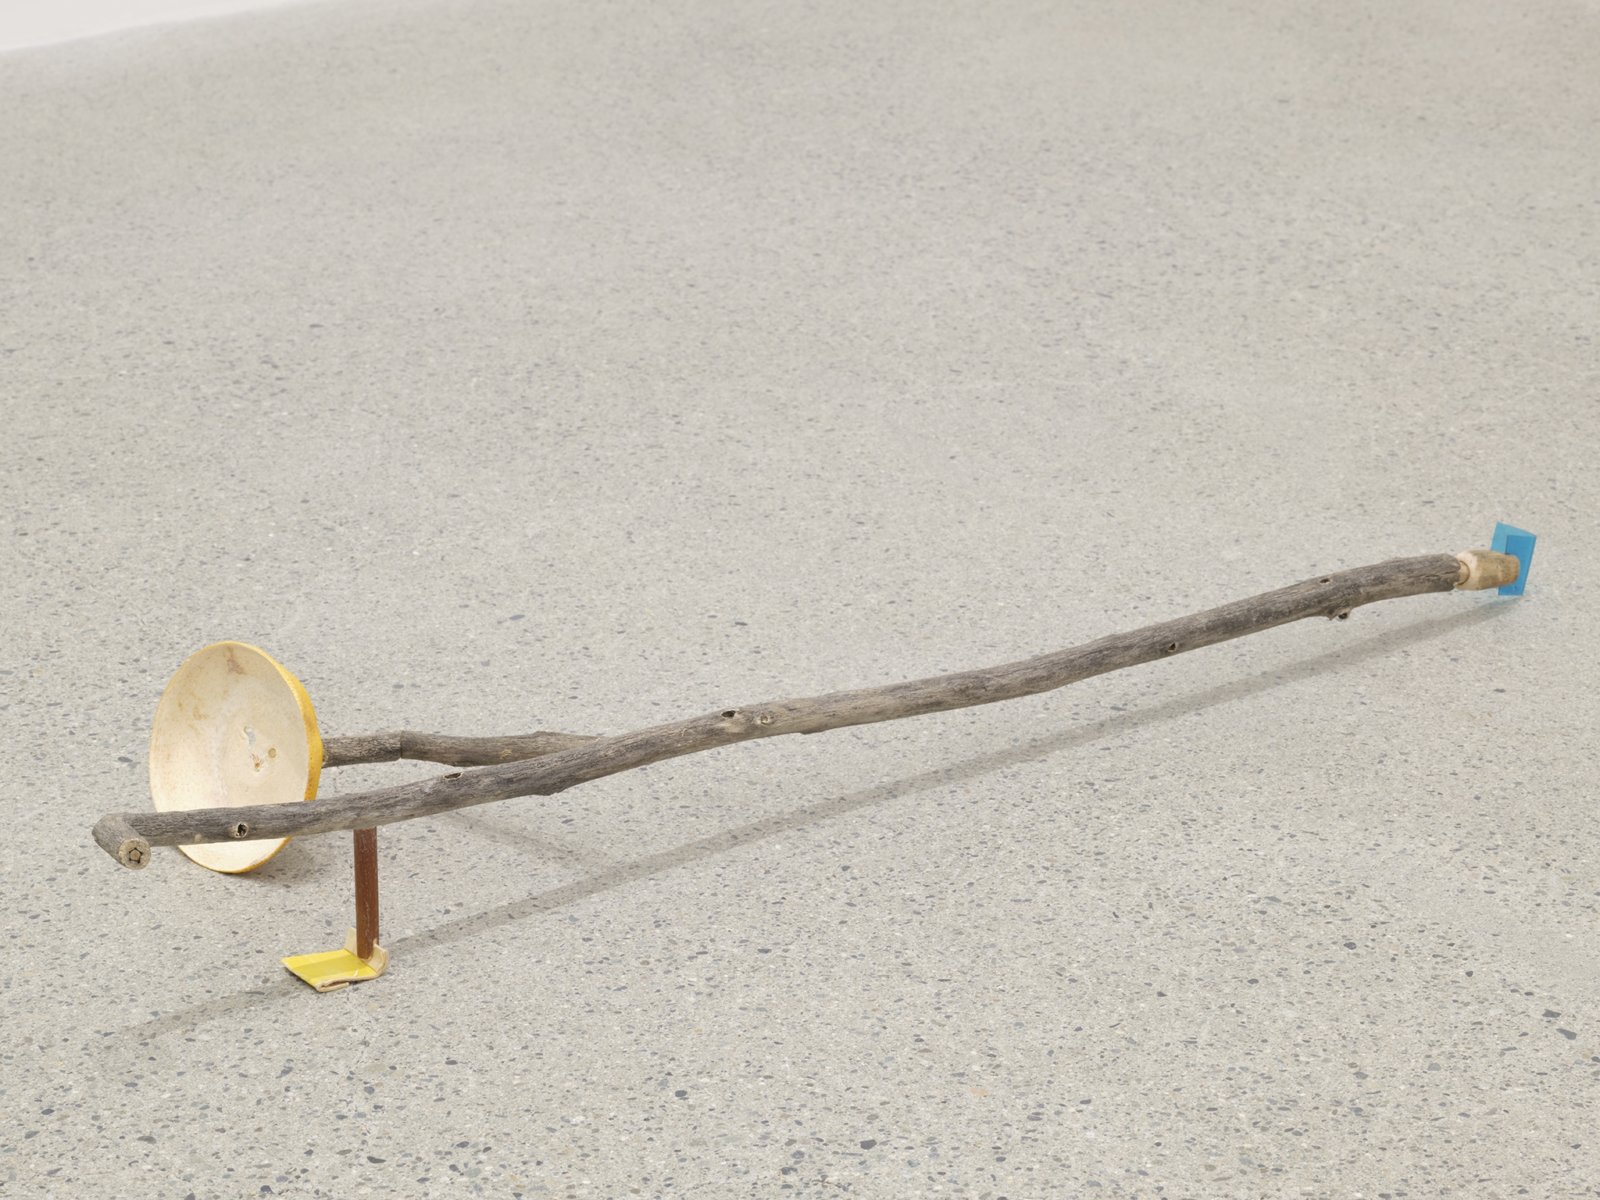 Ashes Withyman, Seagull feather floating, the smell of hot roof-tar also floating, 2019, branches, plastic, compass box cardboard, grapefruit rind, 4 x 30 x 9 in. (10 x 75 x 23 cm)